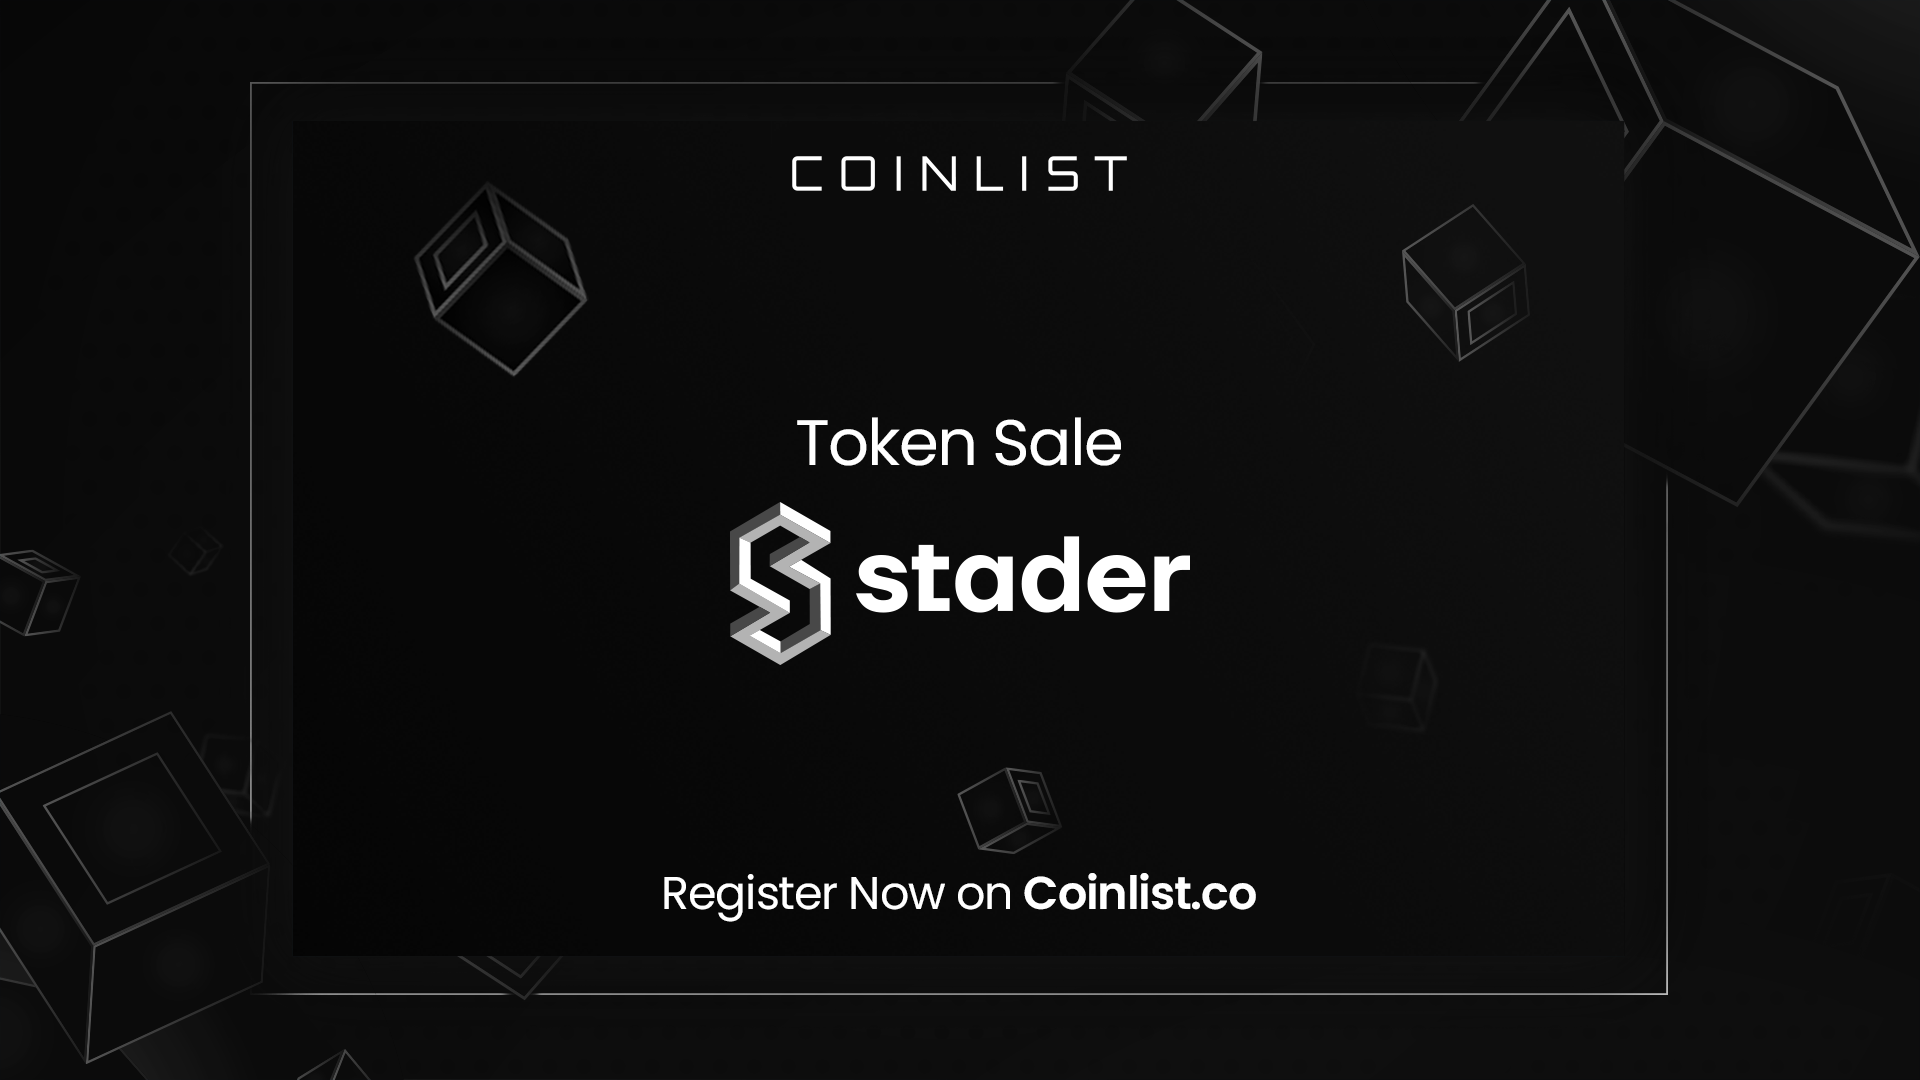 Announcing the Stader Token Sale on CoinList